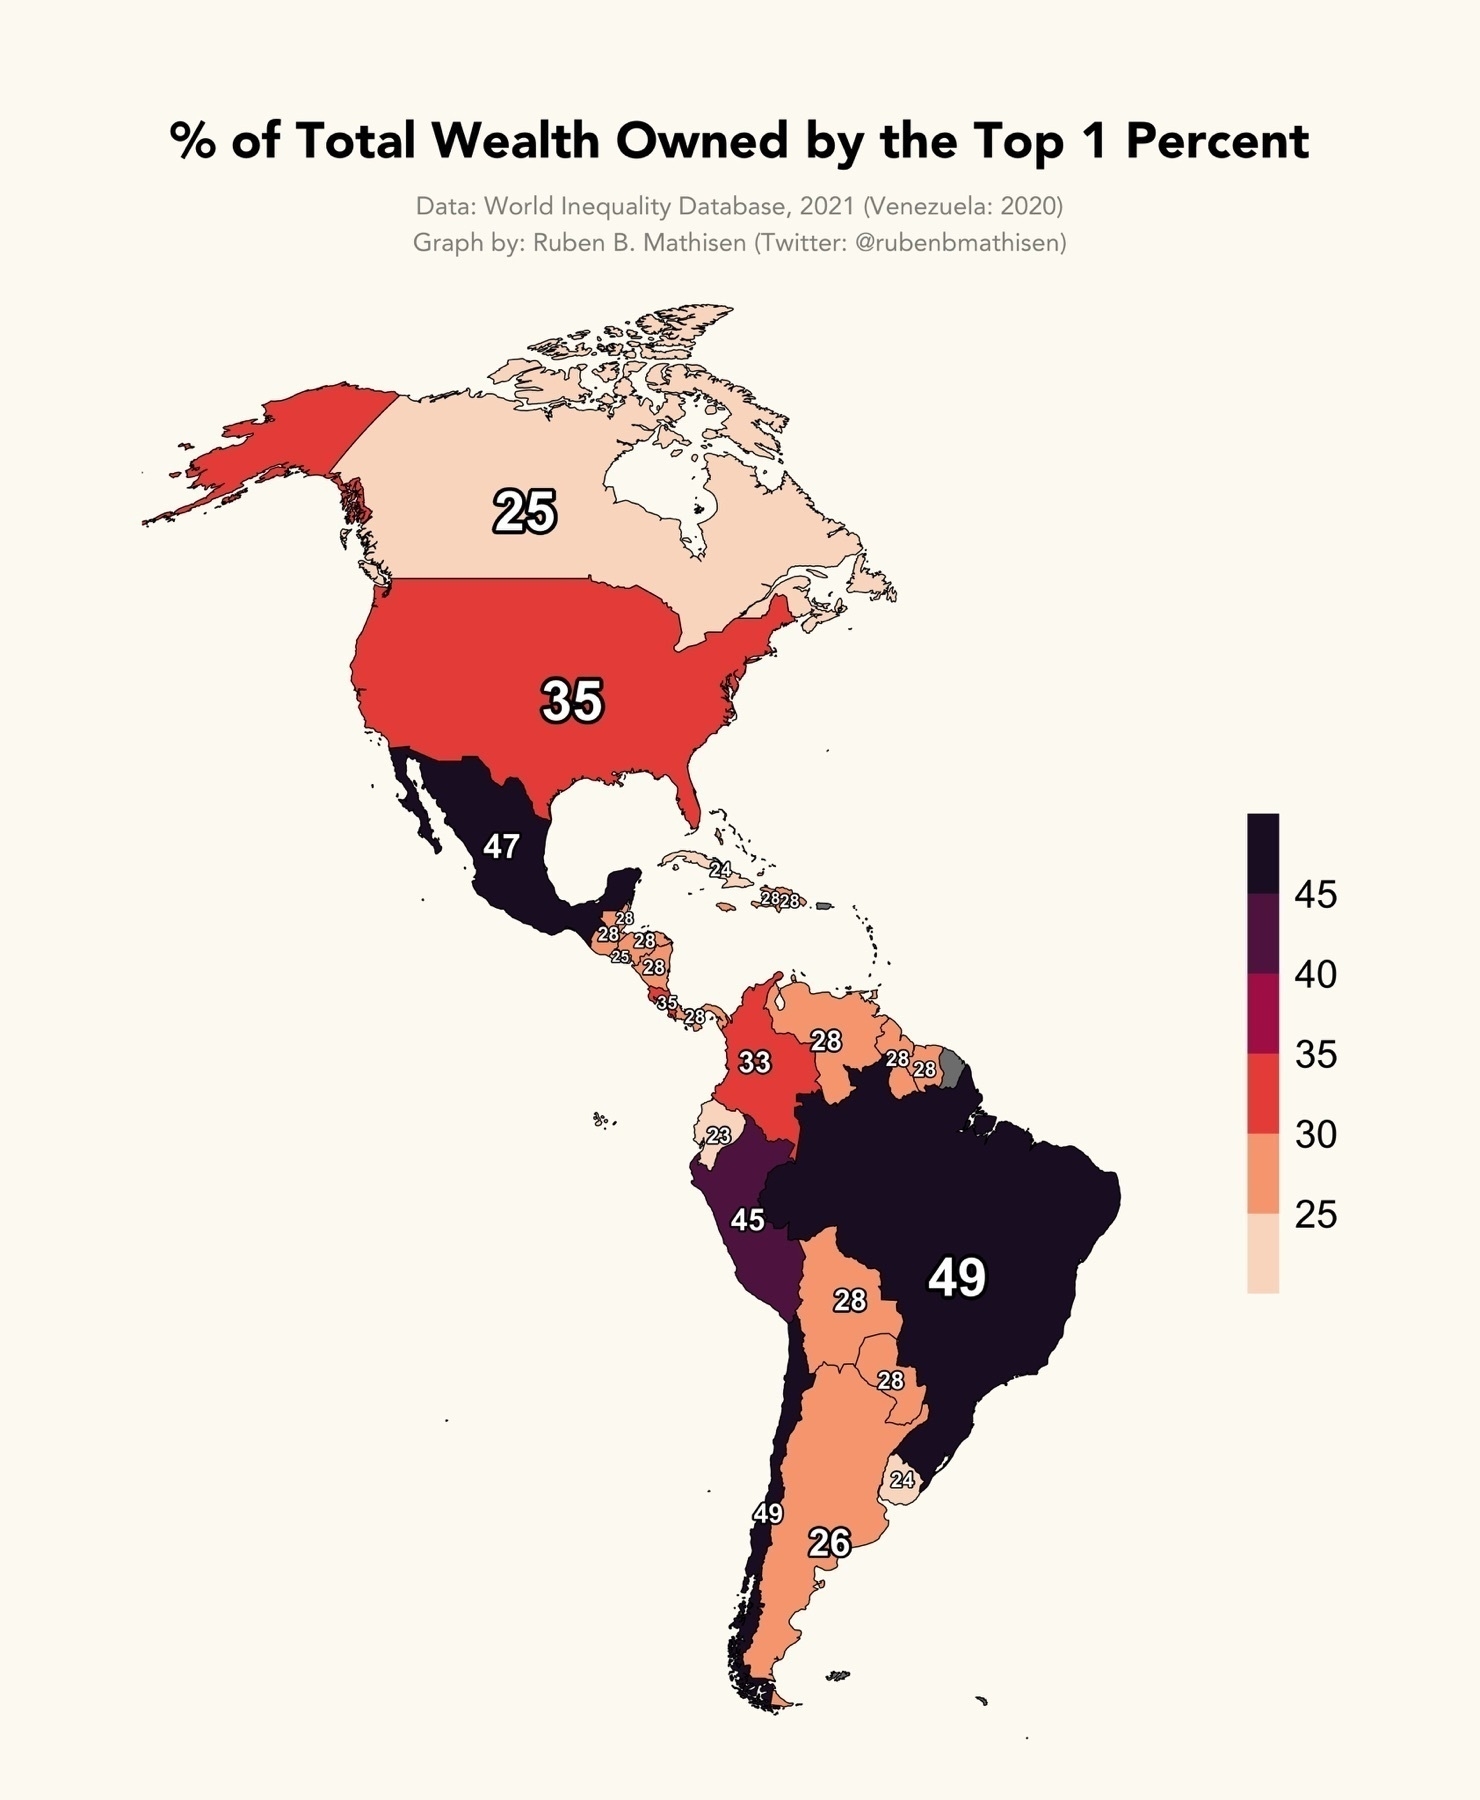 Map of North and South America showing the % of Total Wealth Owned by the Top 1 Percent for each country. Some highlights include: USA = 35%, Canada = 25%, Mexico = 47%, Venezuela = 28%. Brazil and Chile are the highest at = 49% and the lowest is Ecuador = 23%